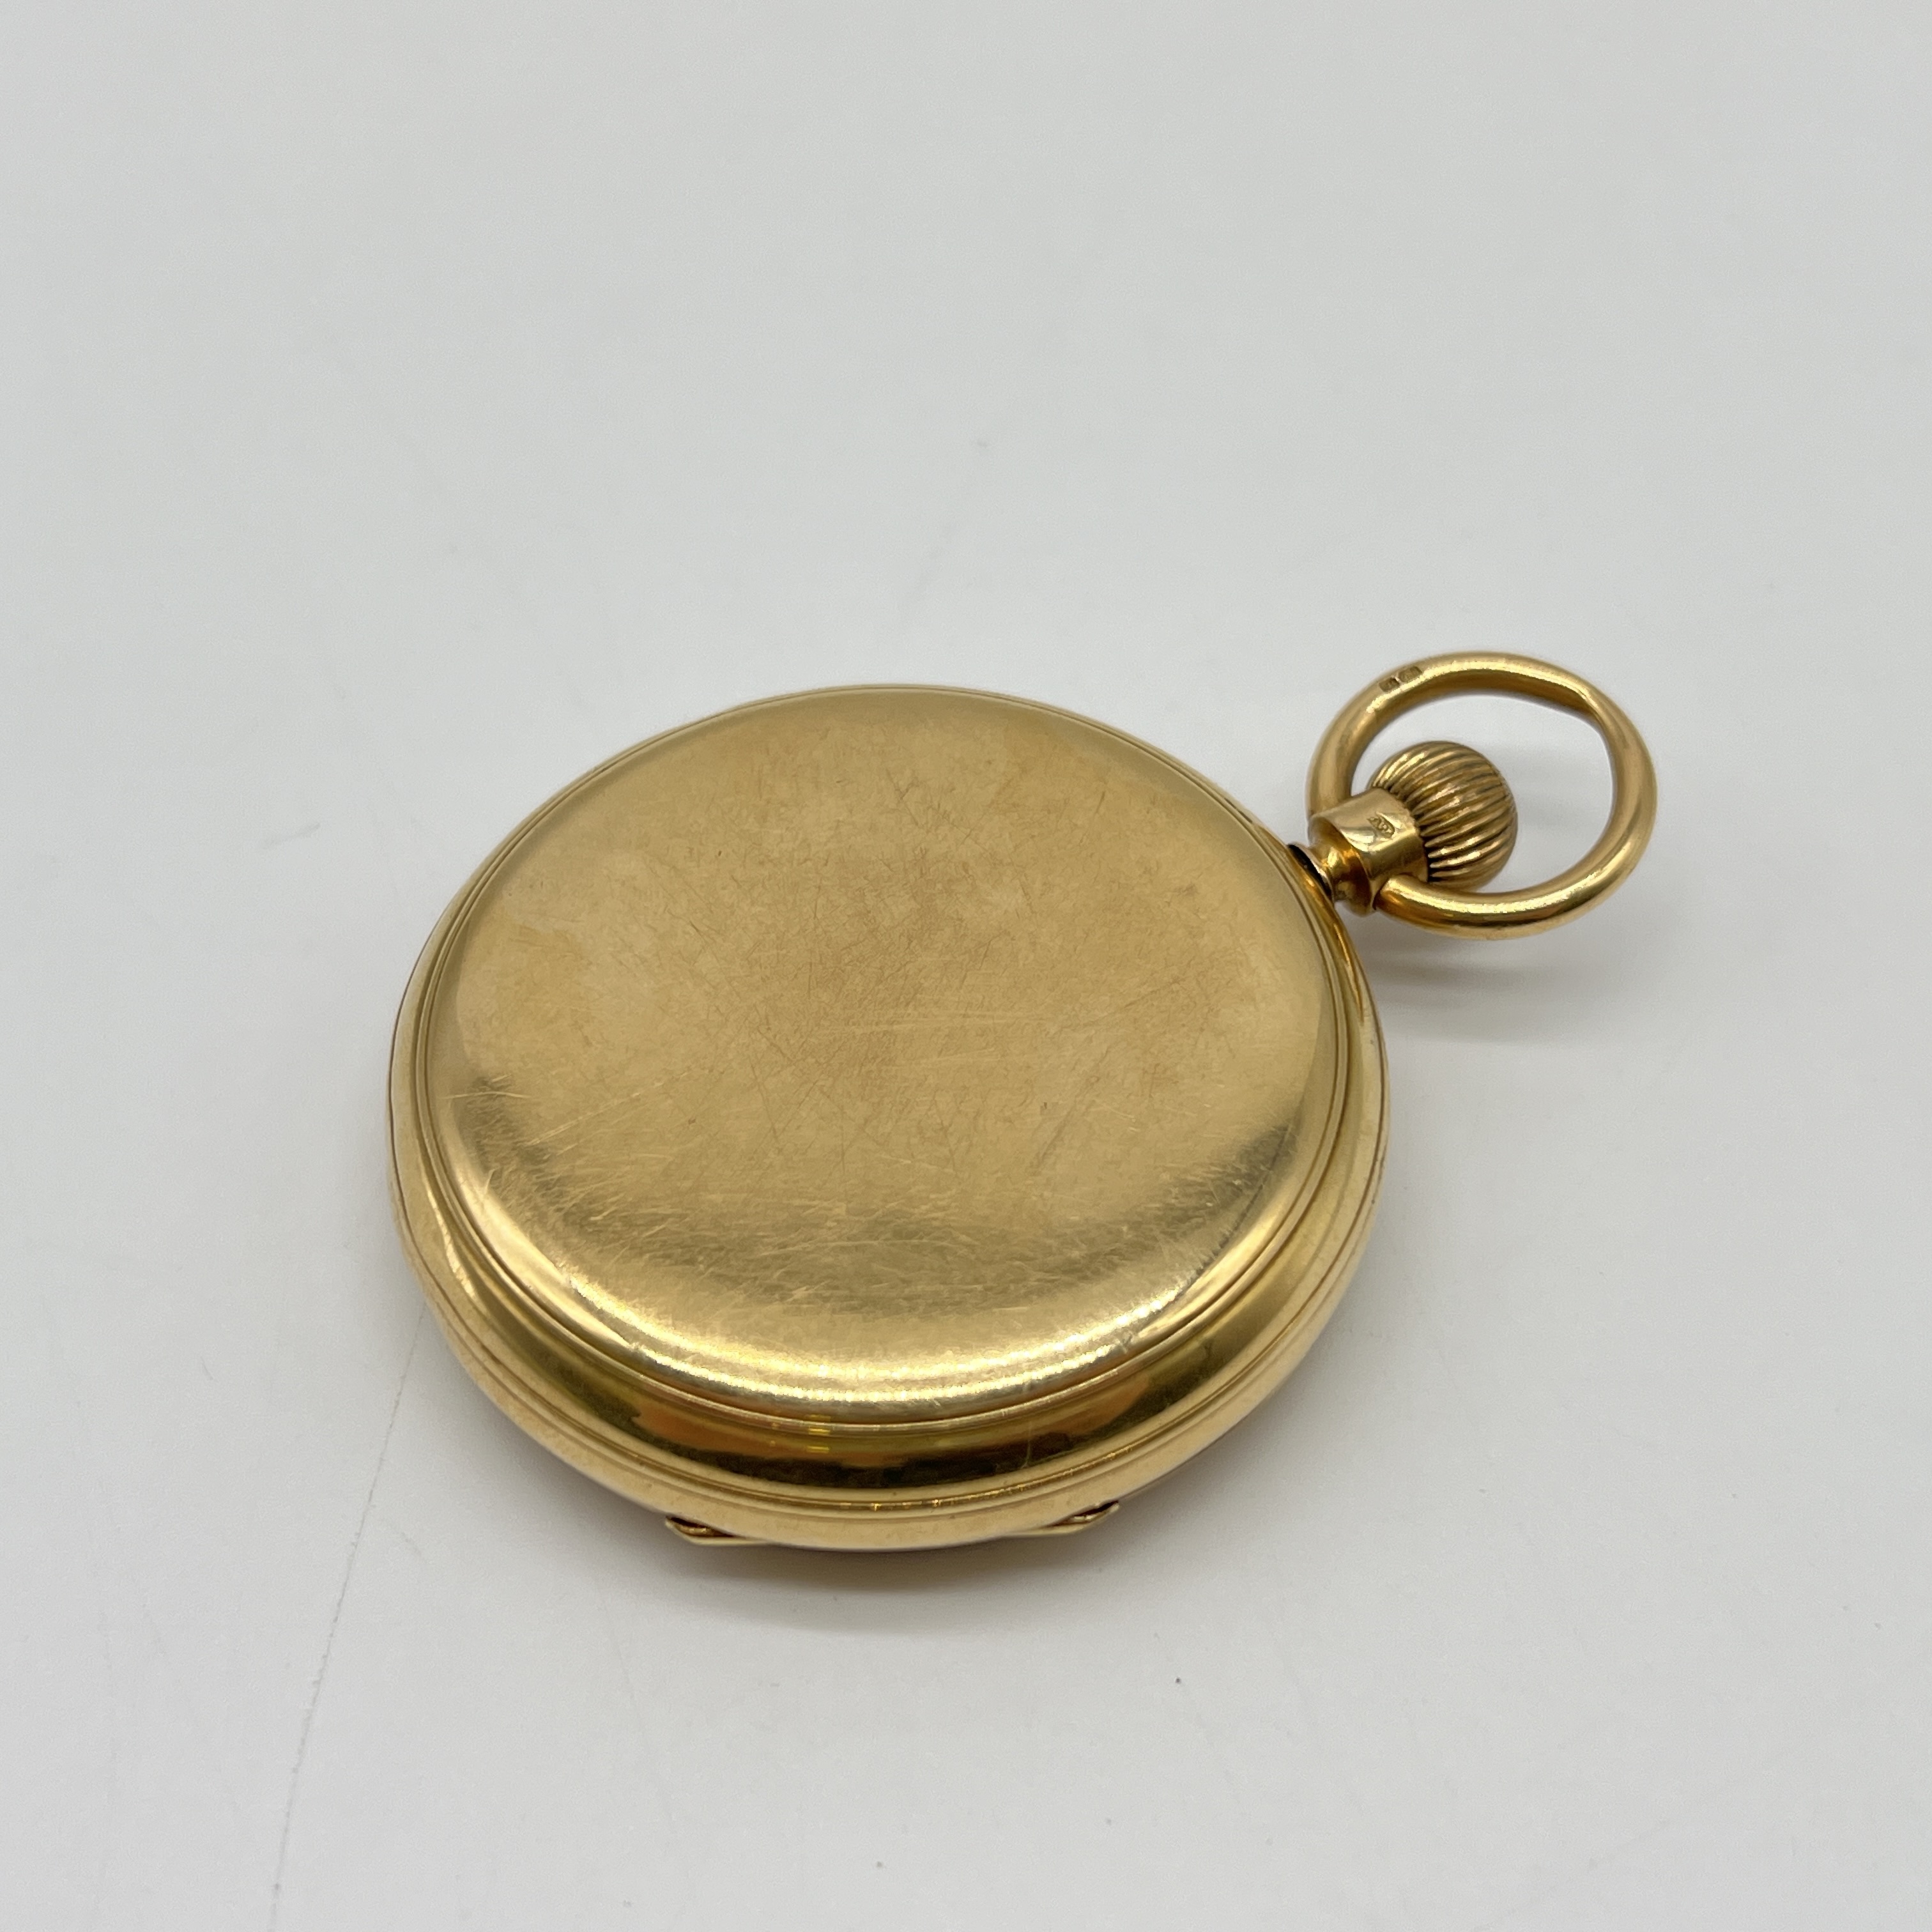 An 18ct yellow gold chronograph pocket watch - Image 7 of 7